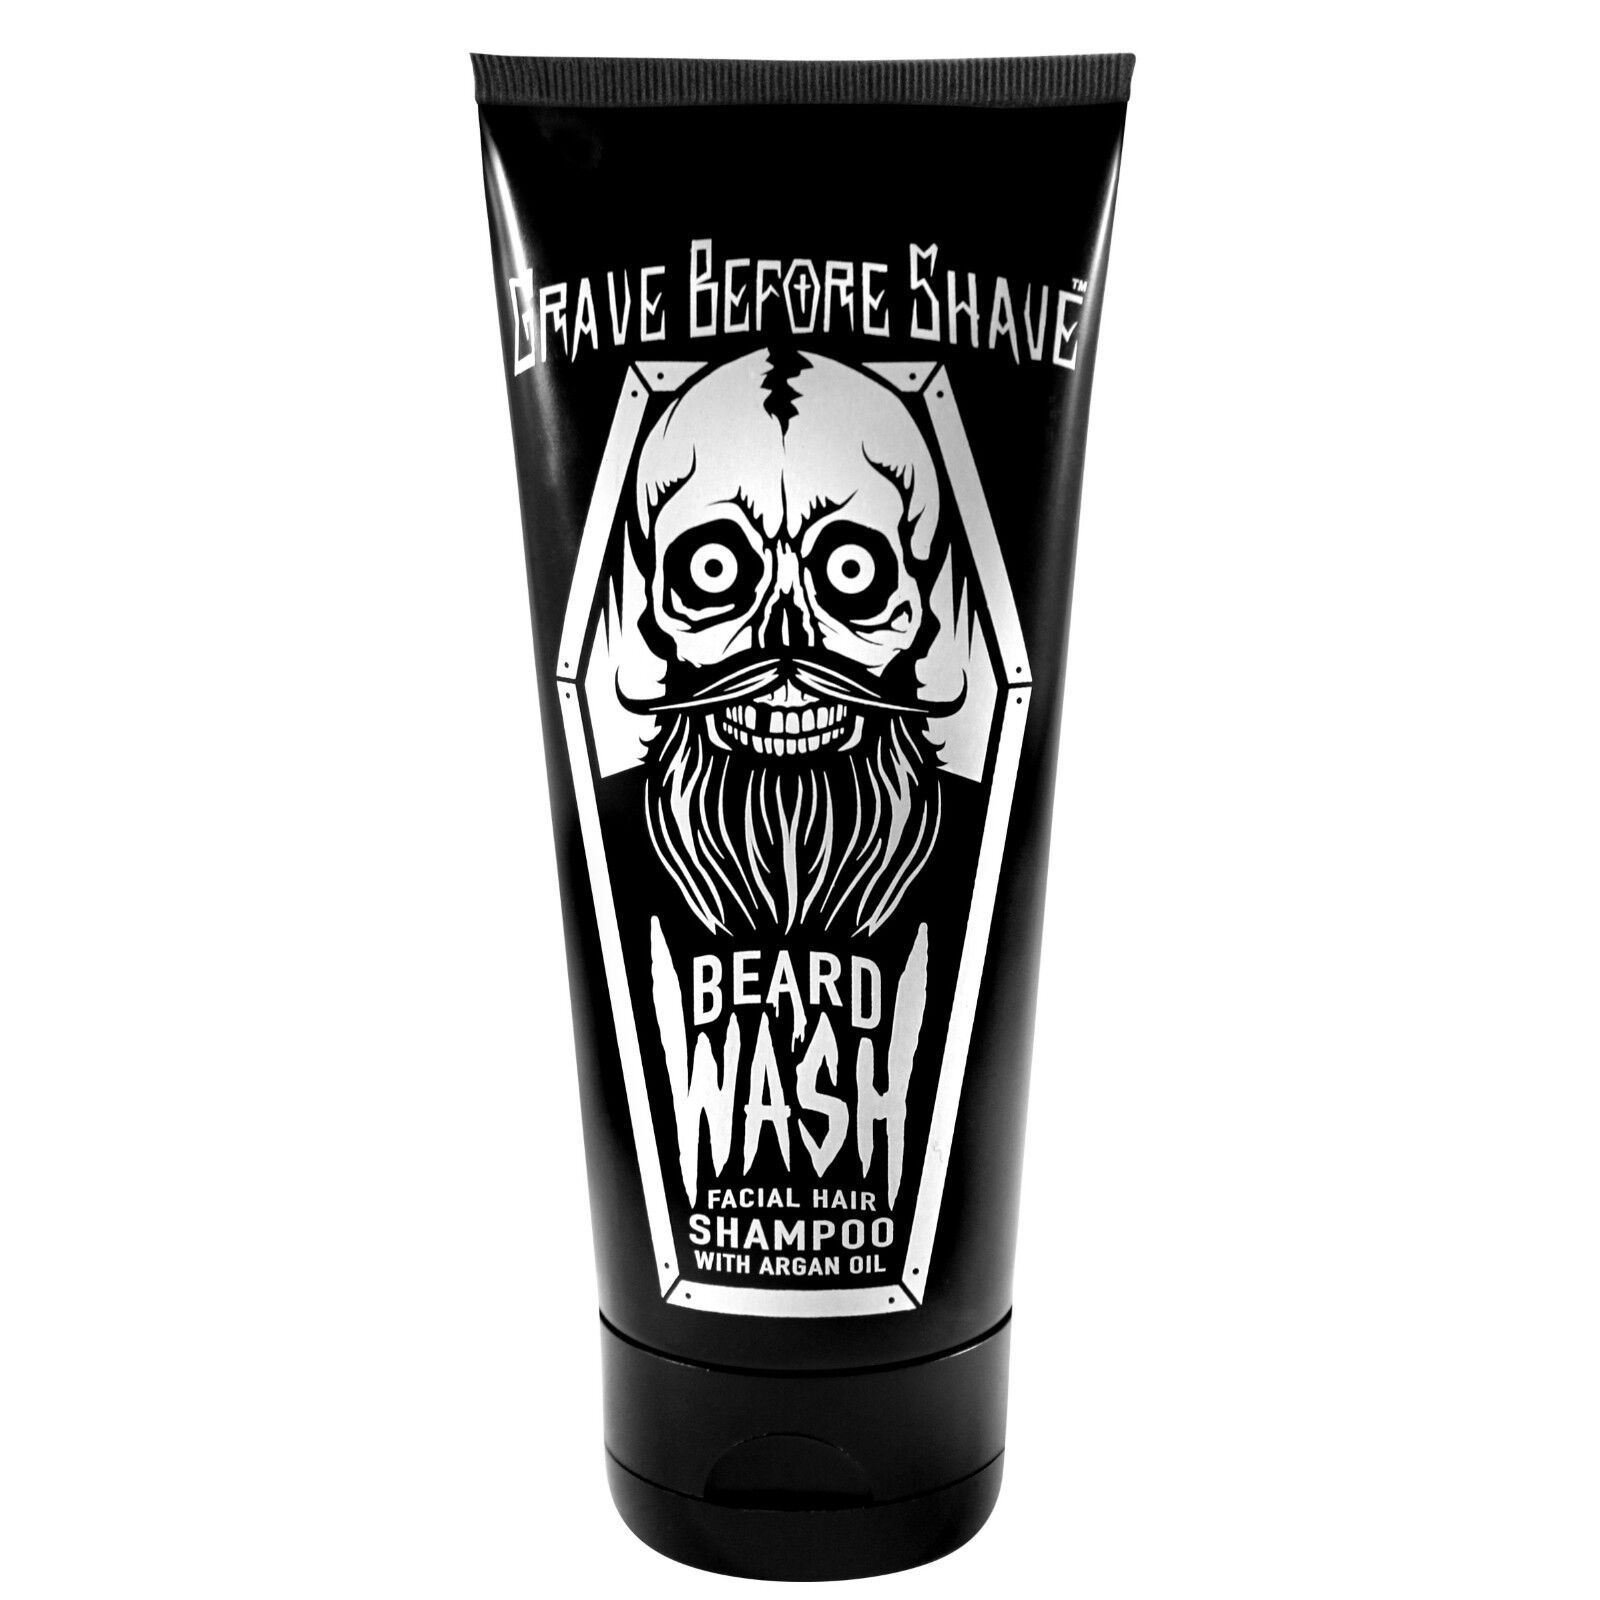 GRAVE BEFORE SHAVE BEARD WASH SHAMPOO Grave Before Shave GBSWASH6OZ